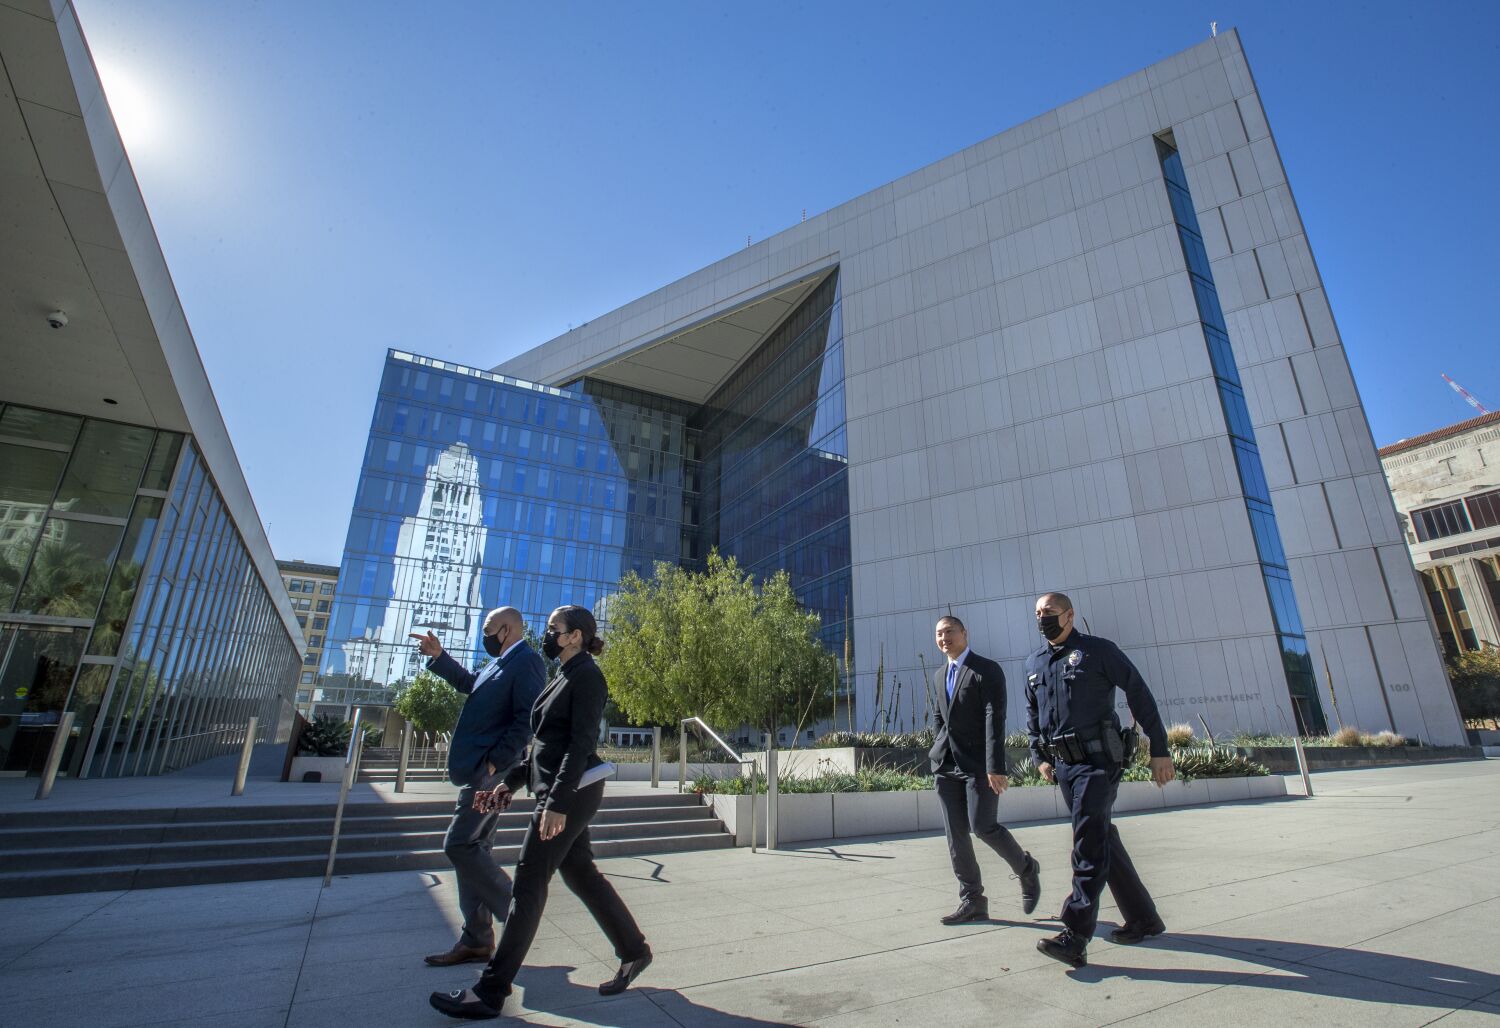 LAPD officer photo scandal: Judge rejects city motion, gives victory to journalist